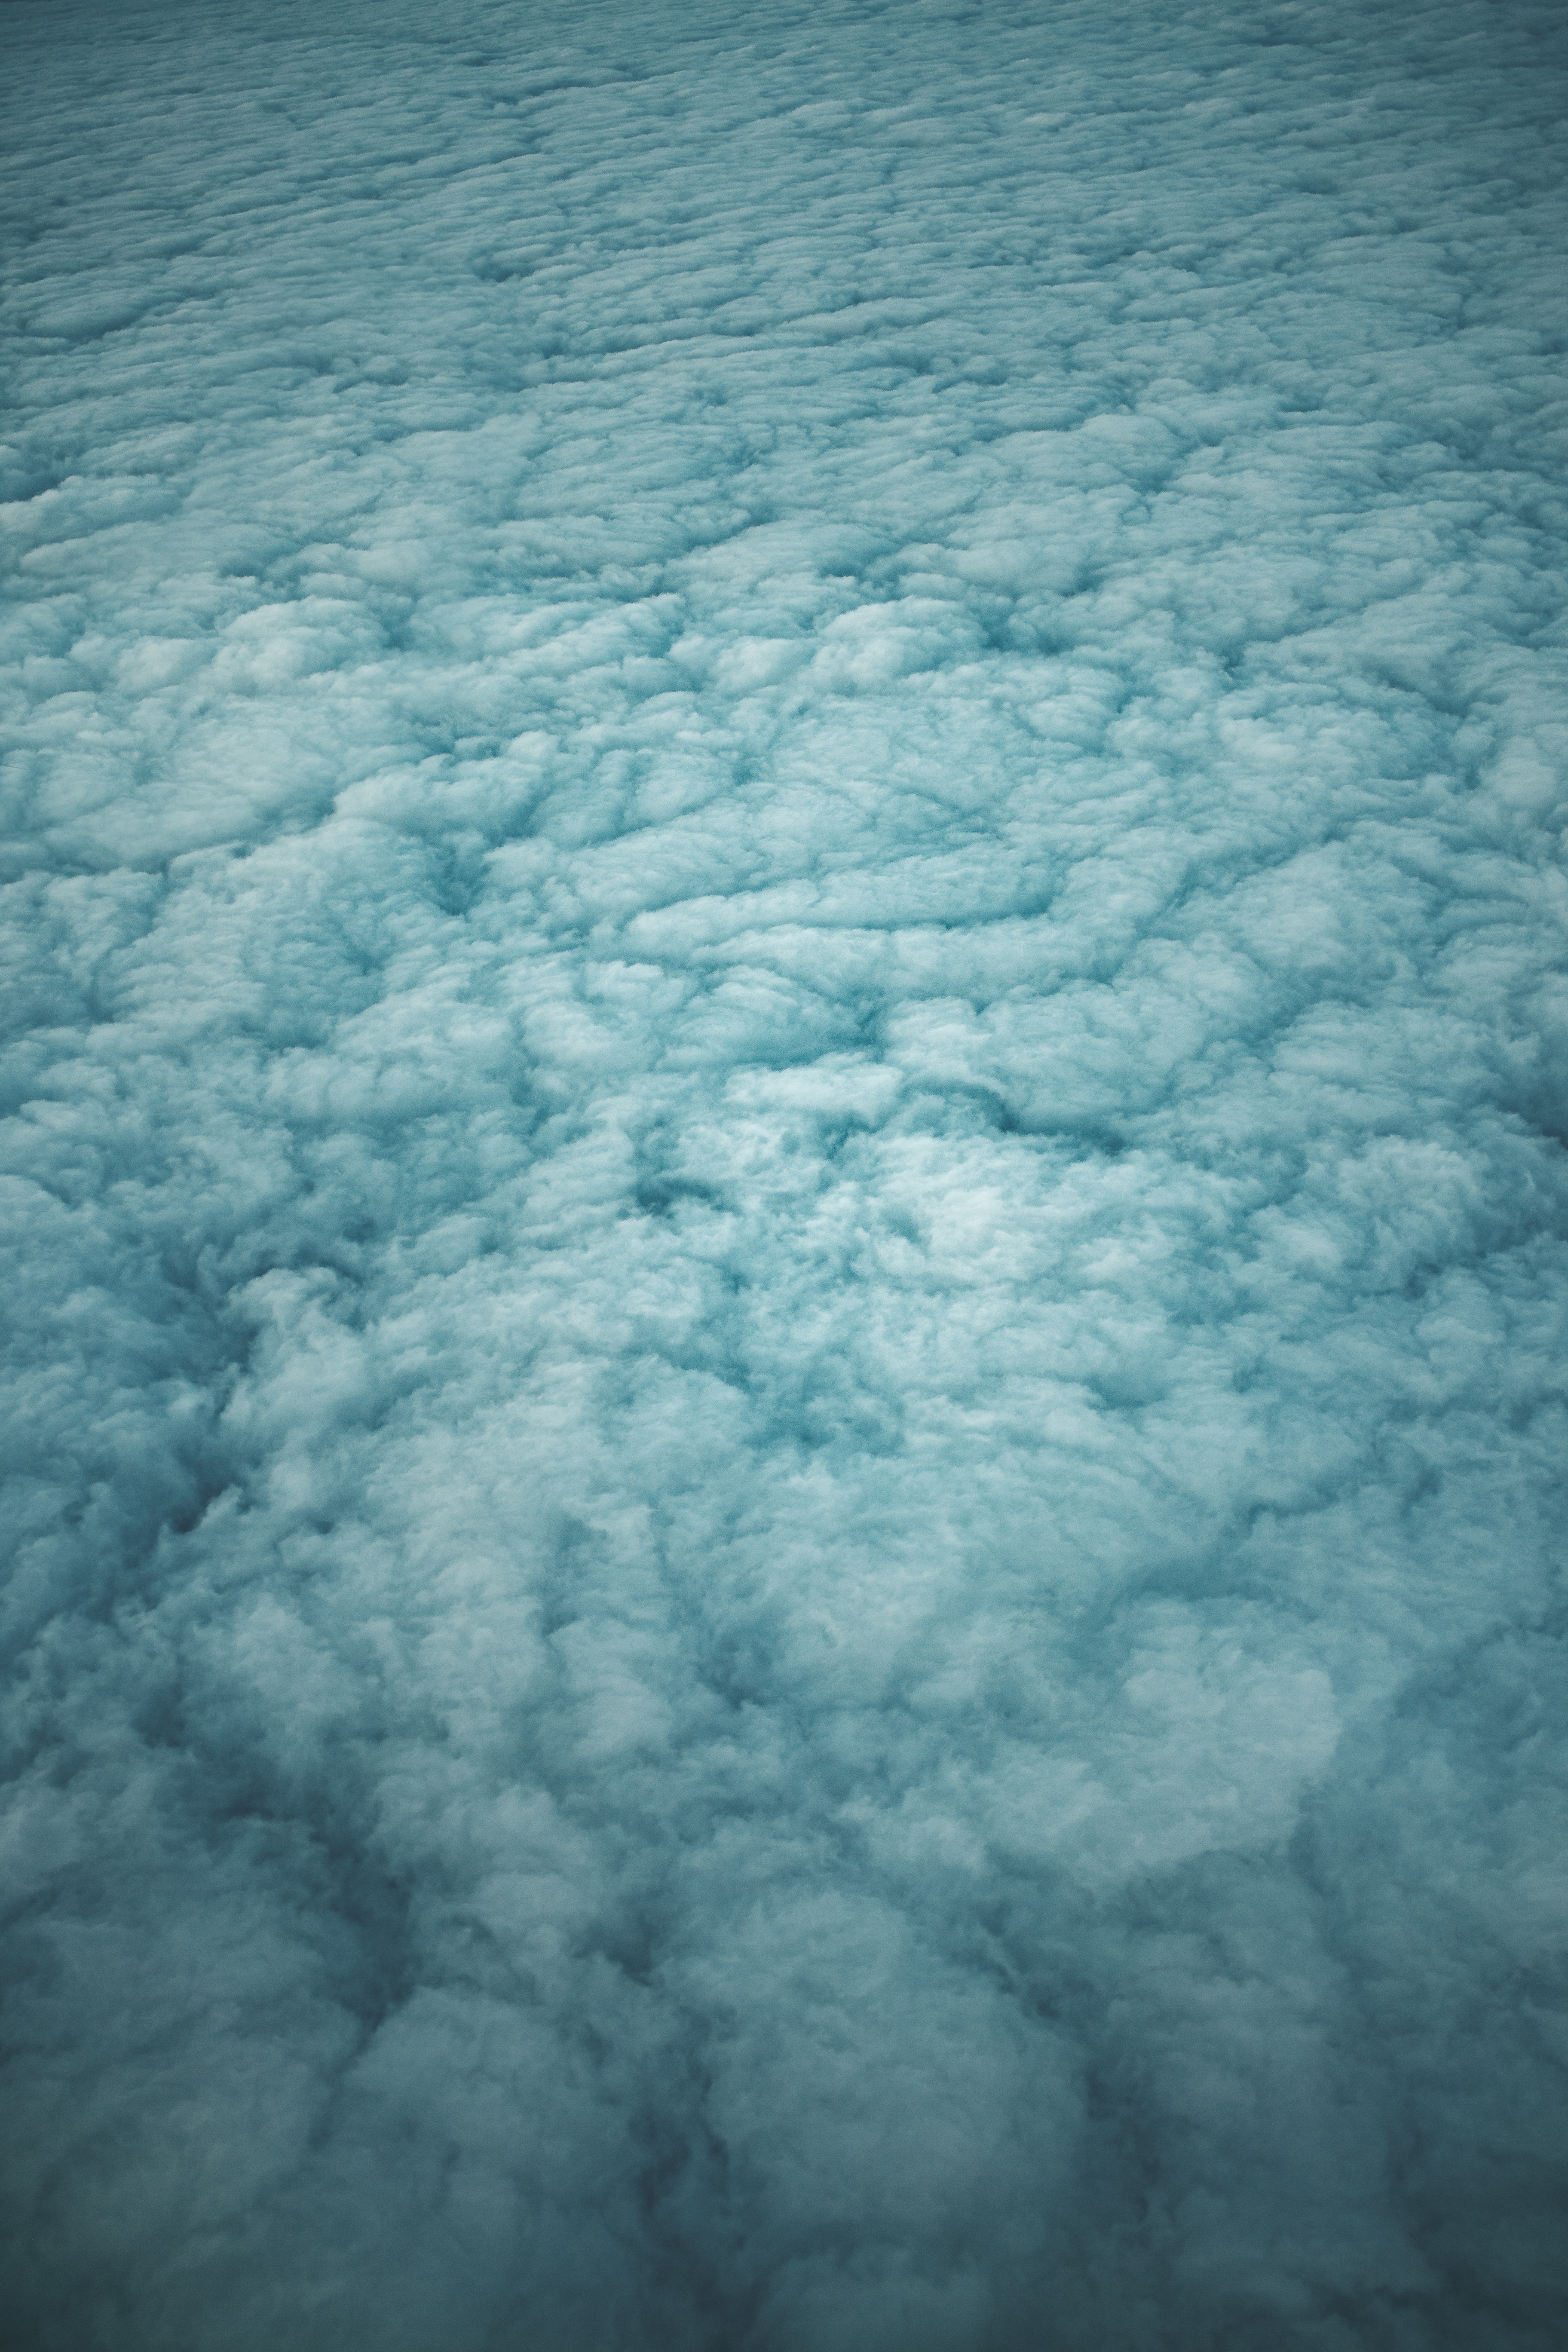 height, view from above, nature, sky, clouds, porous